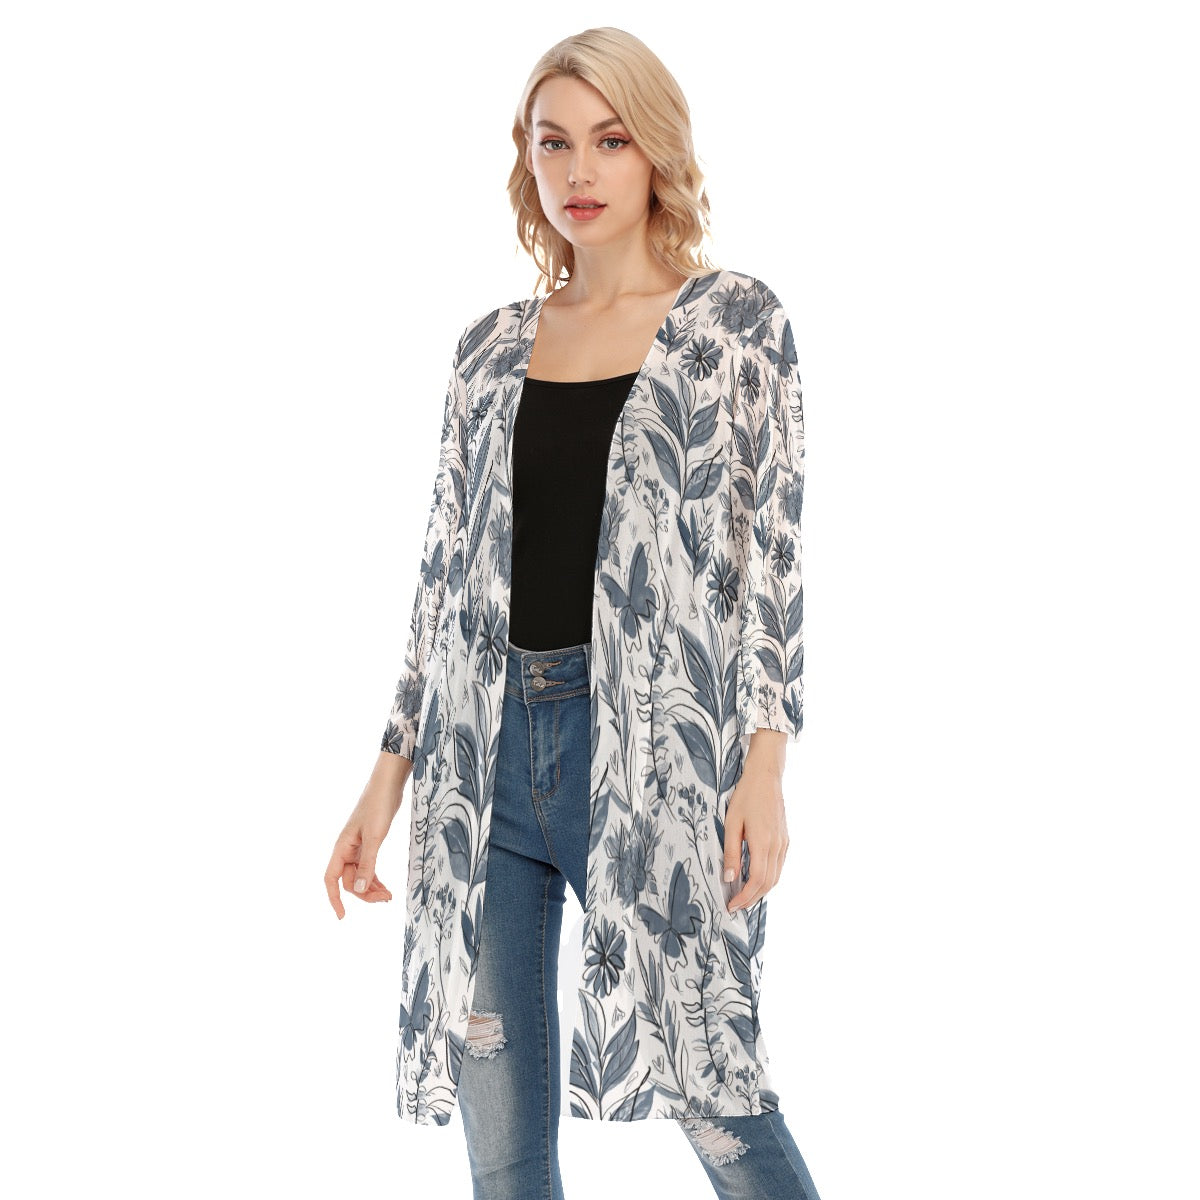 Watercolor White and Blue V-neck Mesh Cardigan. Houston collection. Design hand-painted by the Designer Maria Alejandra Echenique